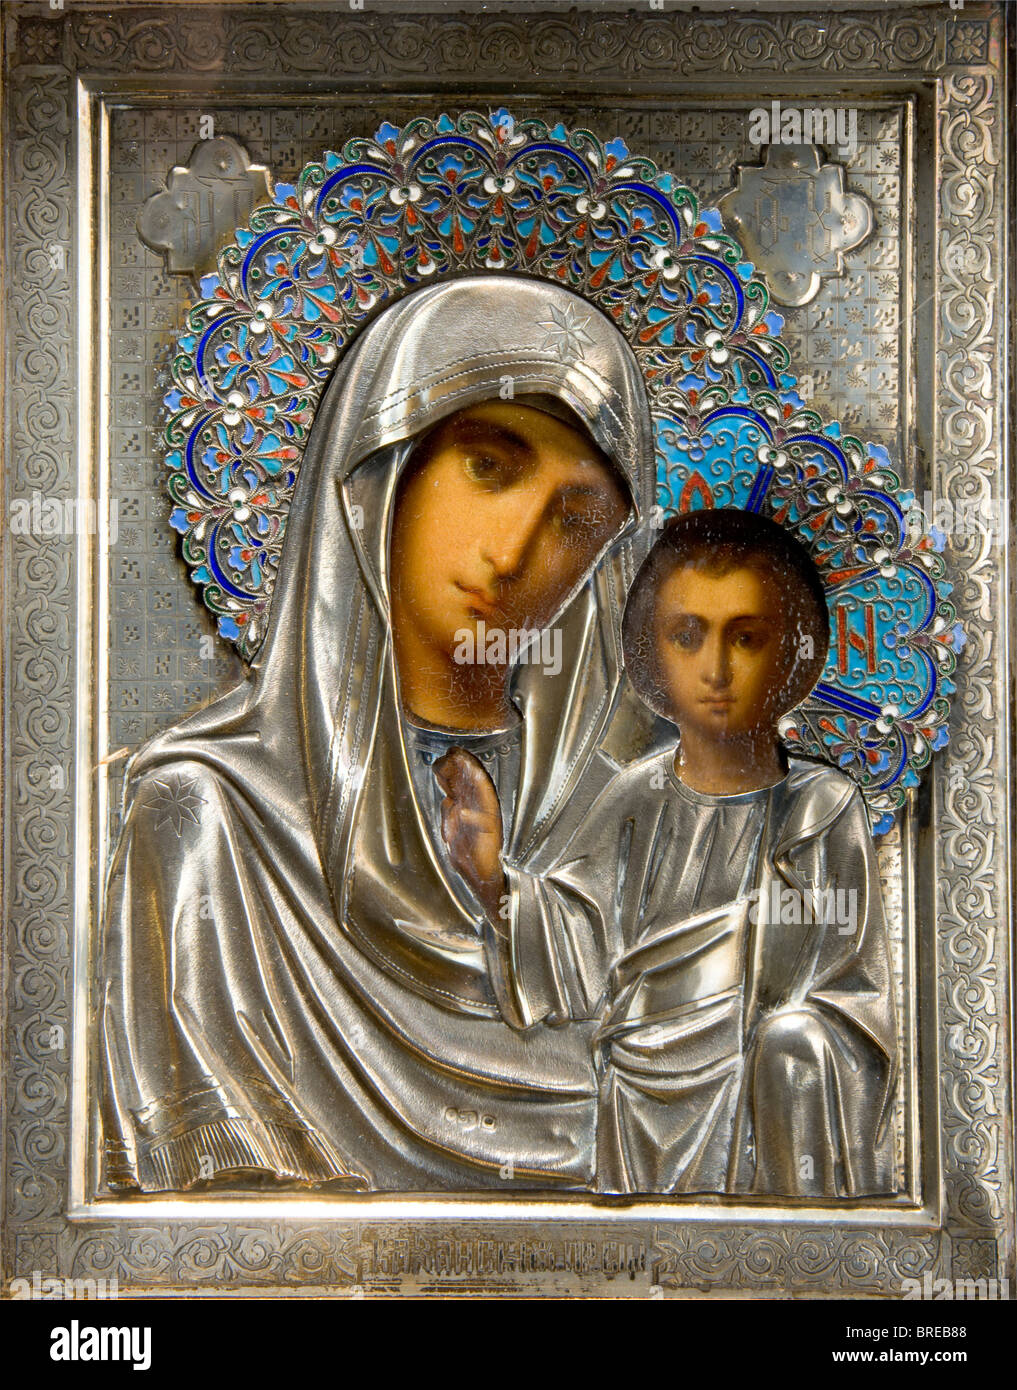 An icon of the Virgin Mary of Kazan, ca. 1900 Beautiful painting. Finely chased and engraved icon with silver oklad, sunburst with cloisonné enamel. Three illegible hallmarks ('88'?). In corresponding, partially gold-plated custom frame with hinged glass door. On the verso the inventory label 'H.V.v.W. G.v.R.' of the Duchess of Württemberg, Grand Duchess of Russia. Dimensions 28.5 x 24.5 cm. Provenance: Grand Duchess Vera Konstantinovna Romanova (1854 - 1912). historic, historical, people, 1900s, 20th century, 19th century, fine arts, art, art object, art objec, Stock Photo